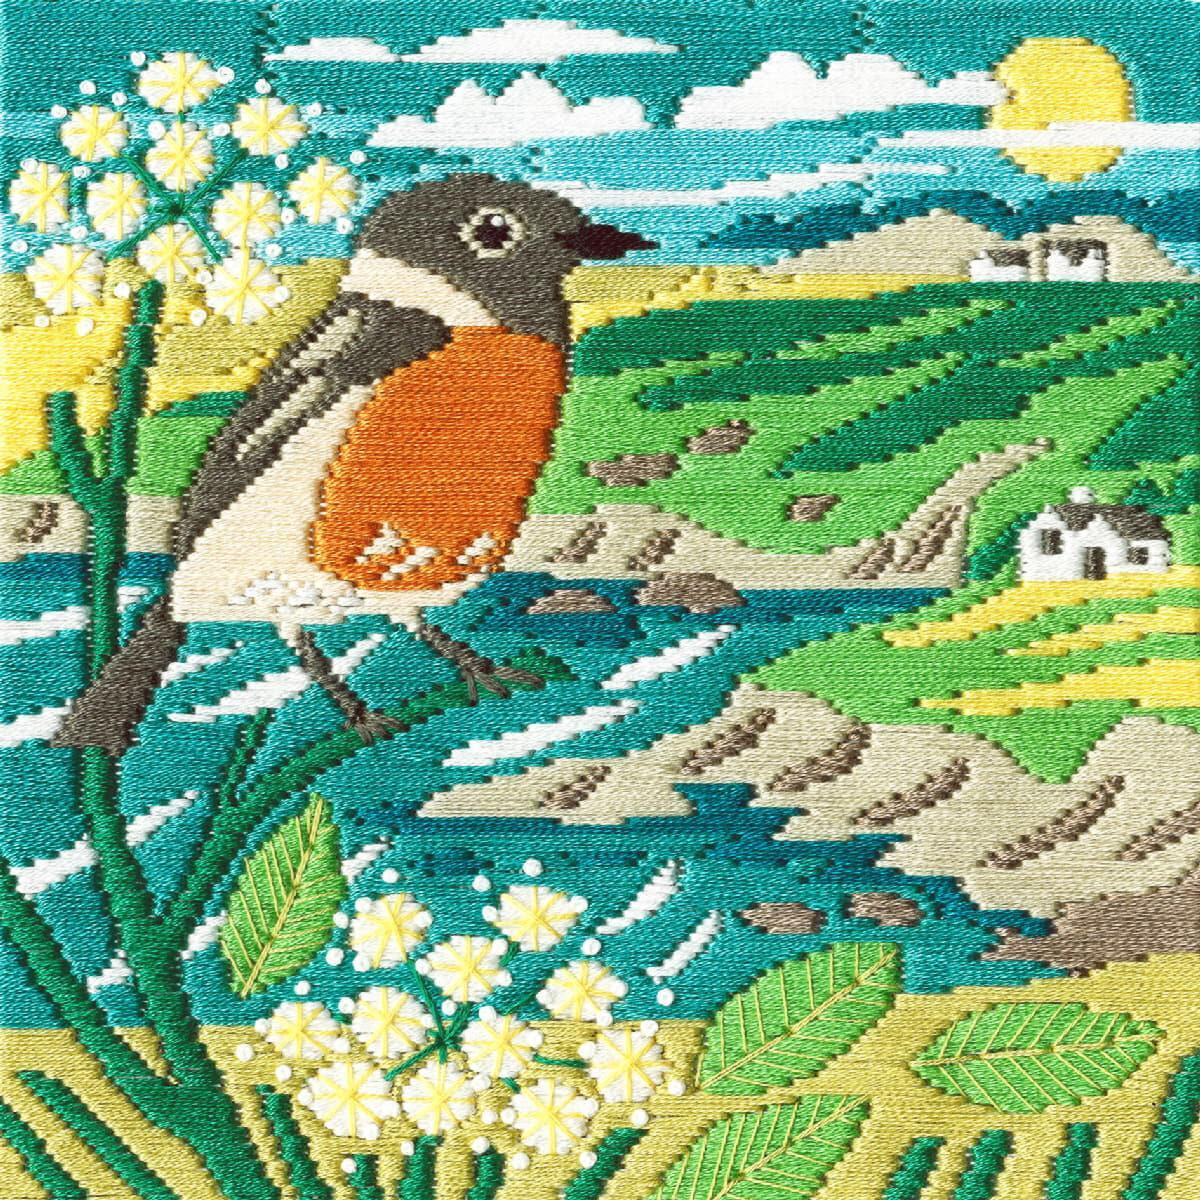 An embroidery pack from Bothy Threads showing a bird with...